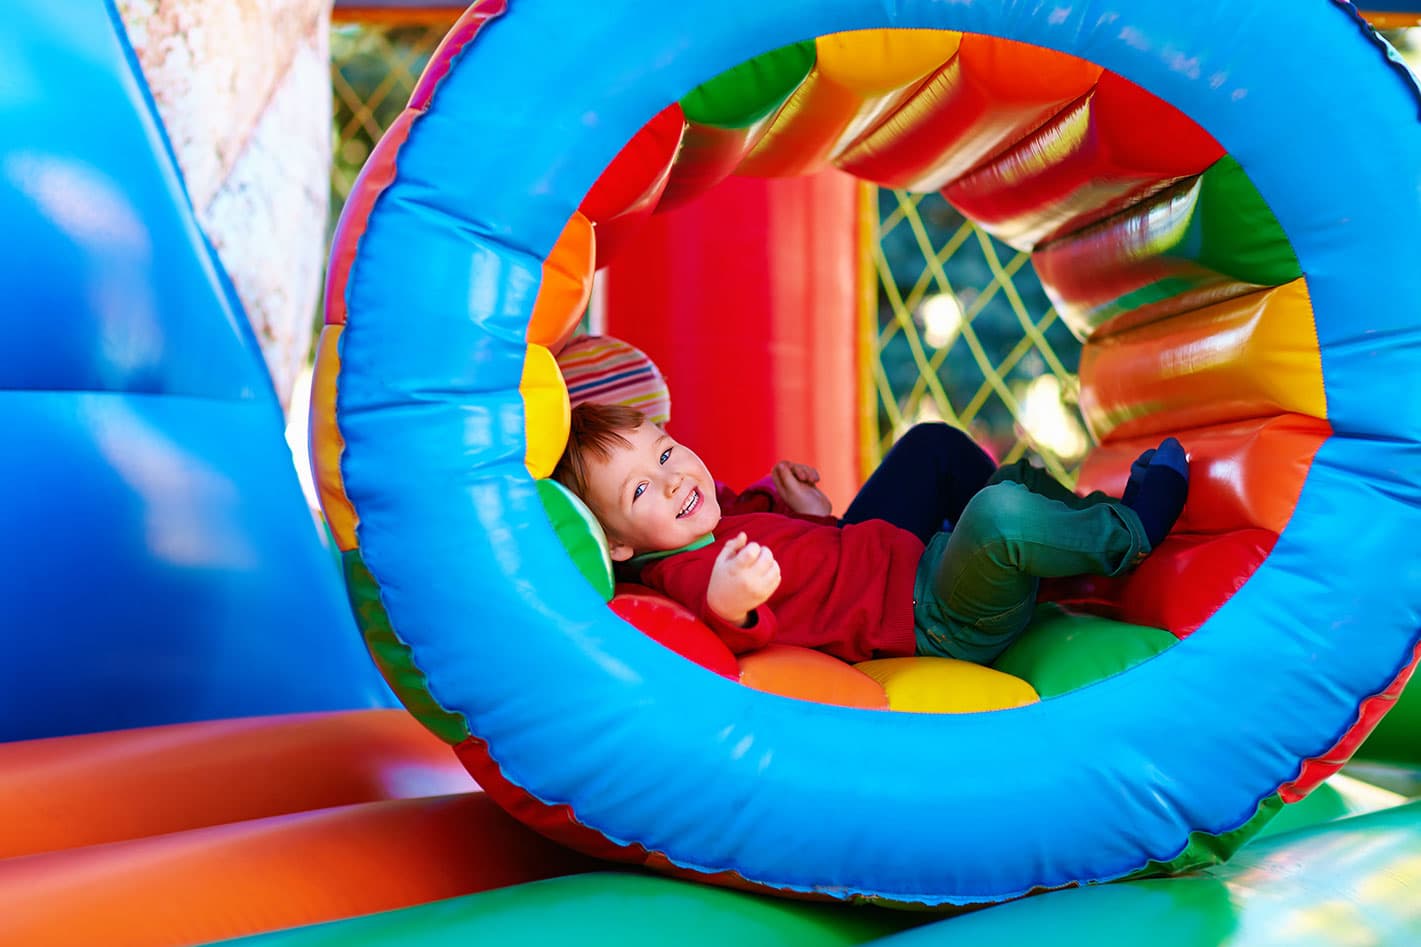 The bouncy castle: the inflatable for young children